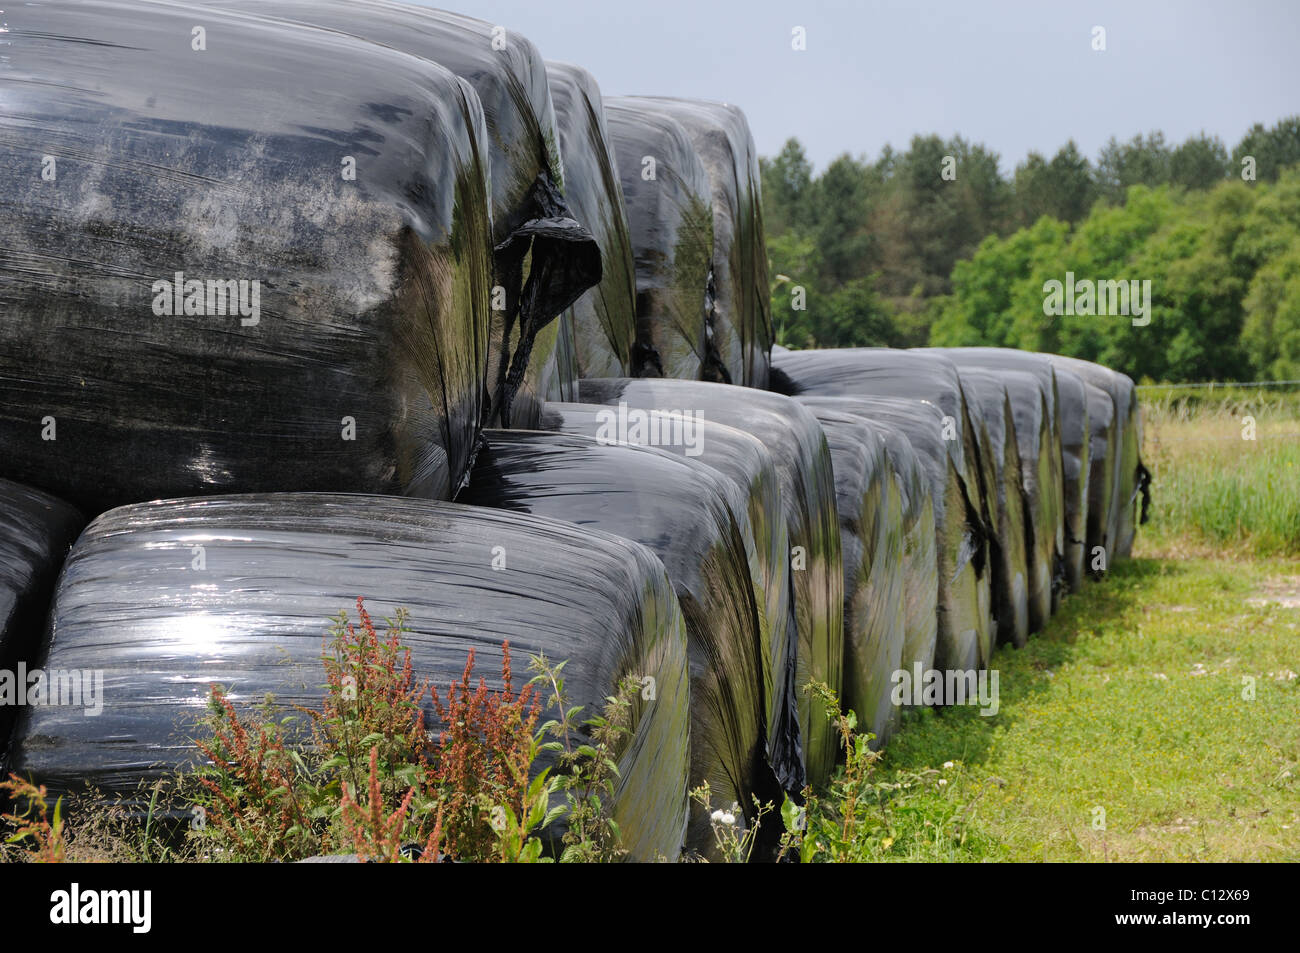 Stored and wrapped hay bales Stock Photo